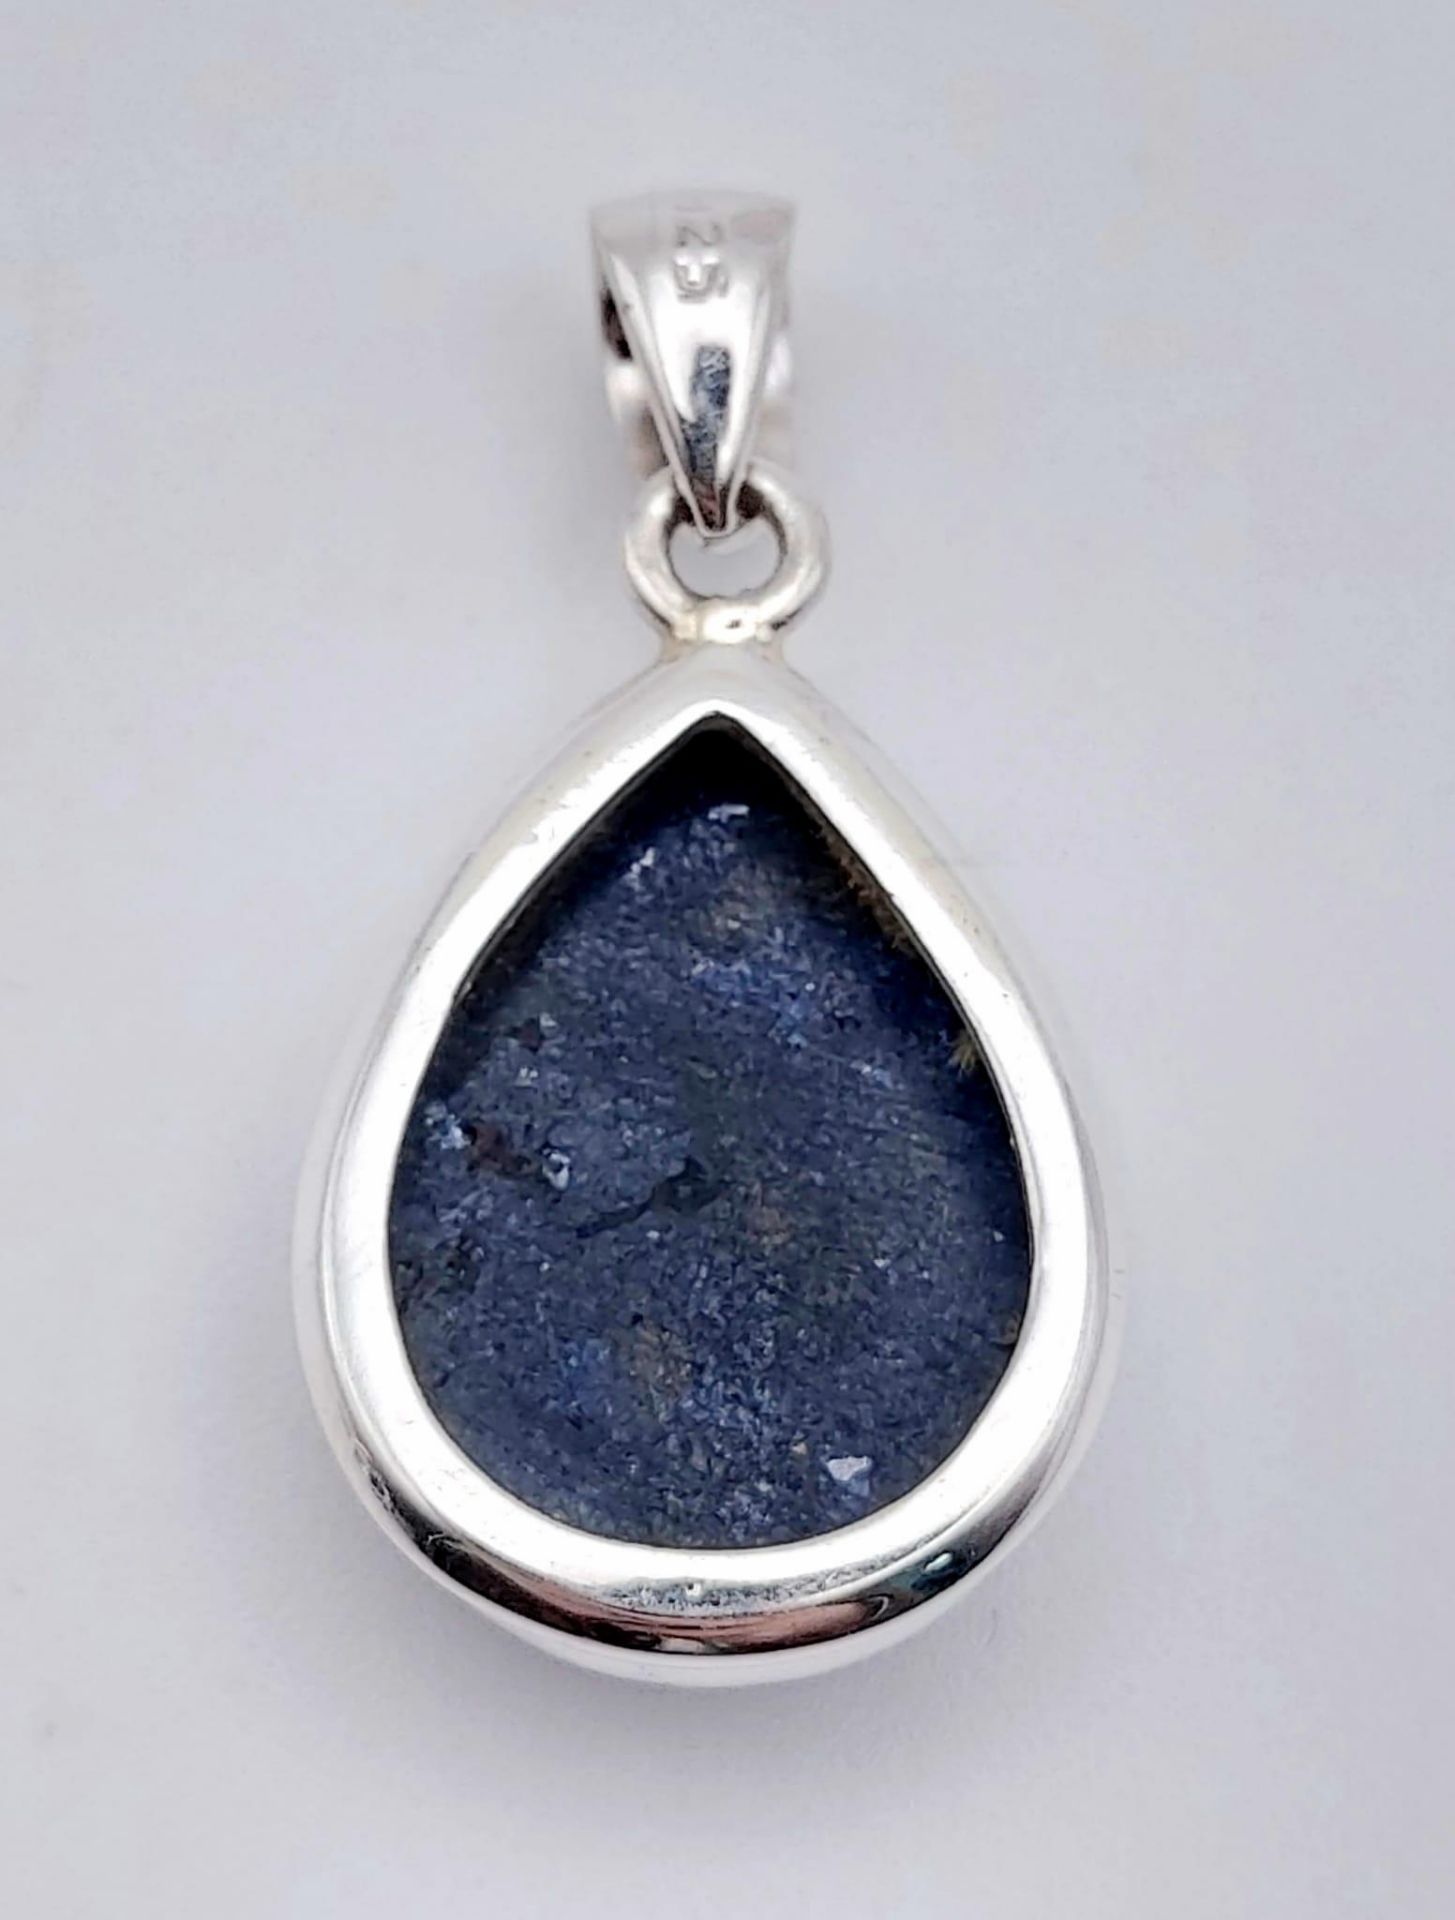 925 Silver Pendant with Matching Ring. Total Weight 14.18grams. Ring Size M. - Image 5 of 7